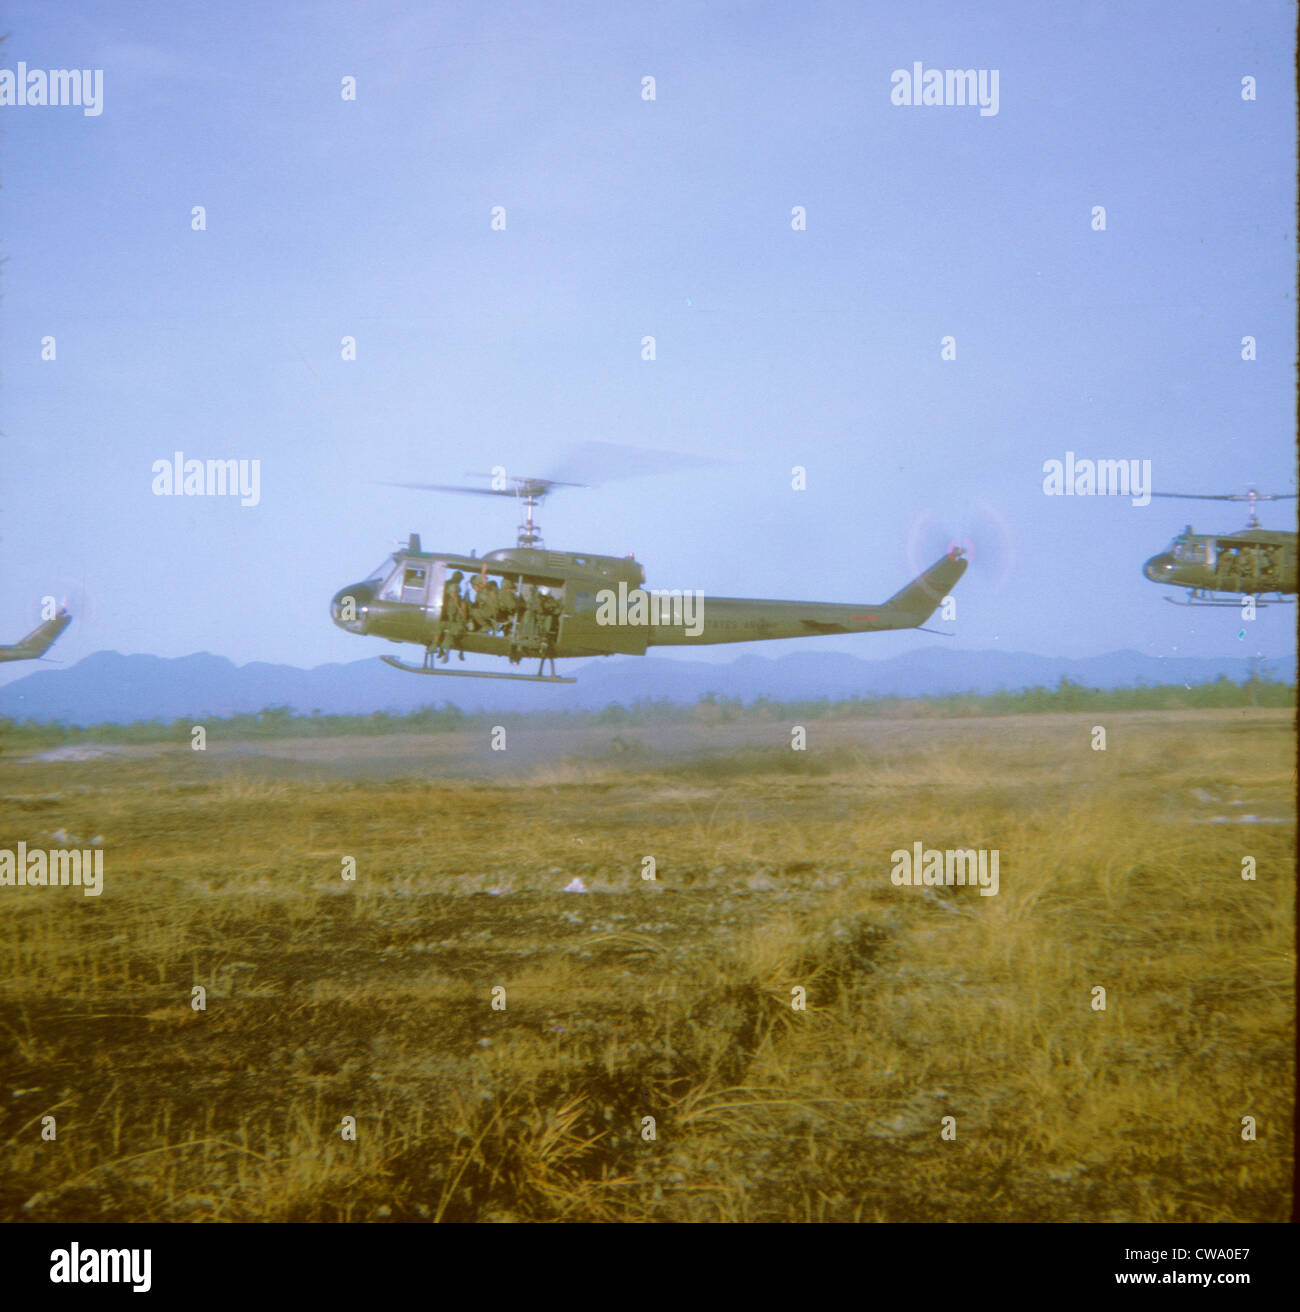 A Company, 227th AHC lift Cavalry Huey Helicopter inserting troops assault American Soldiers GIs US Army United States Military Stock Photo